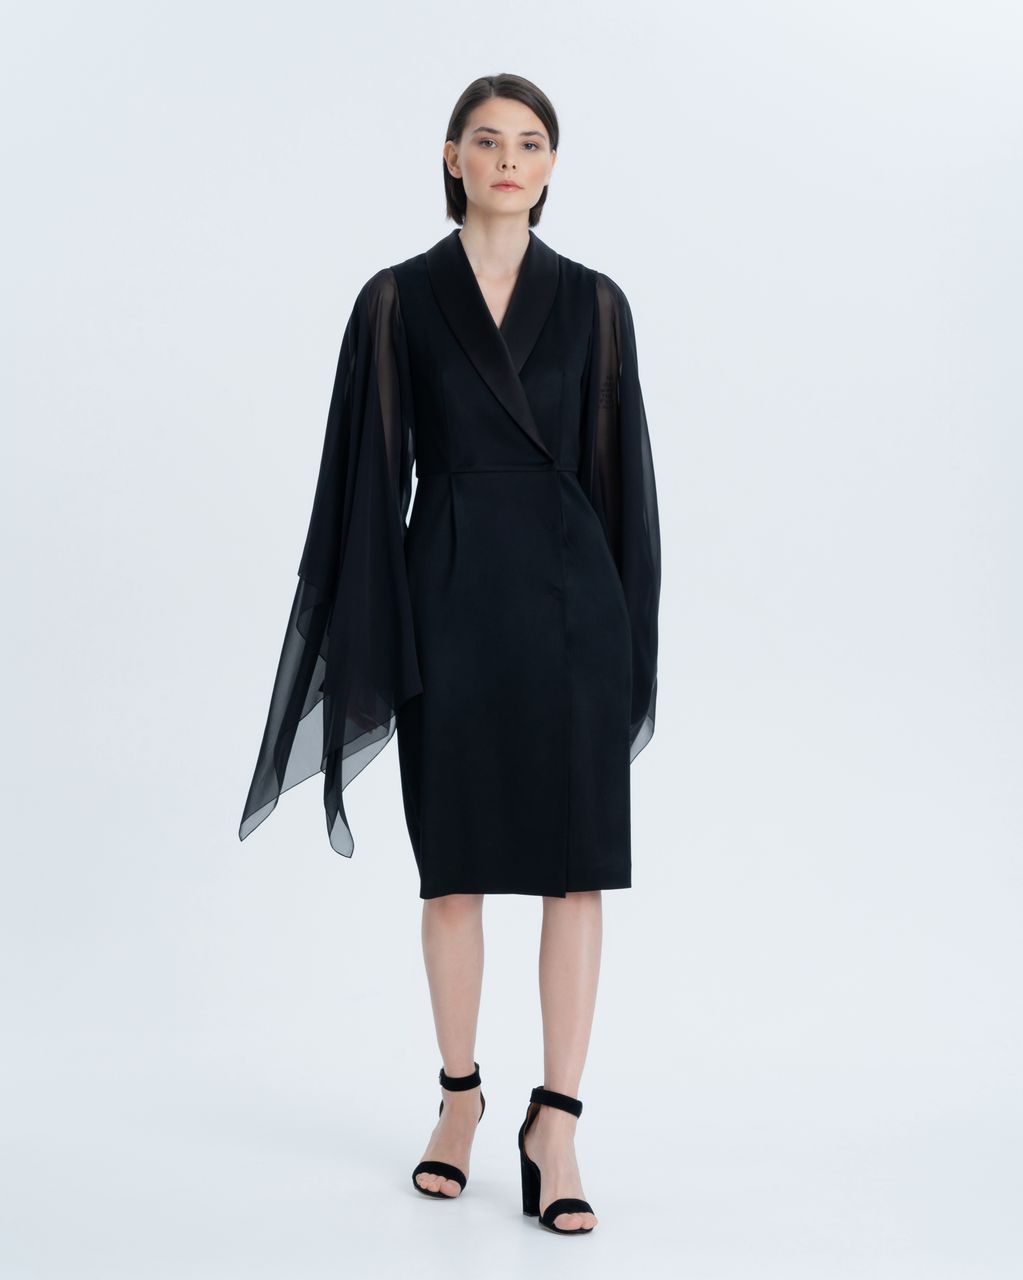 Tuxedo dress made of premium Italian suit wool with silk chiffon wing sleeves. The lapel of the dress is trimmed with thick satin, and a double-breasted clasp on tight sewn buttons, which gives the image a special chic. For your comfort, the dress is